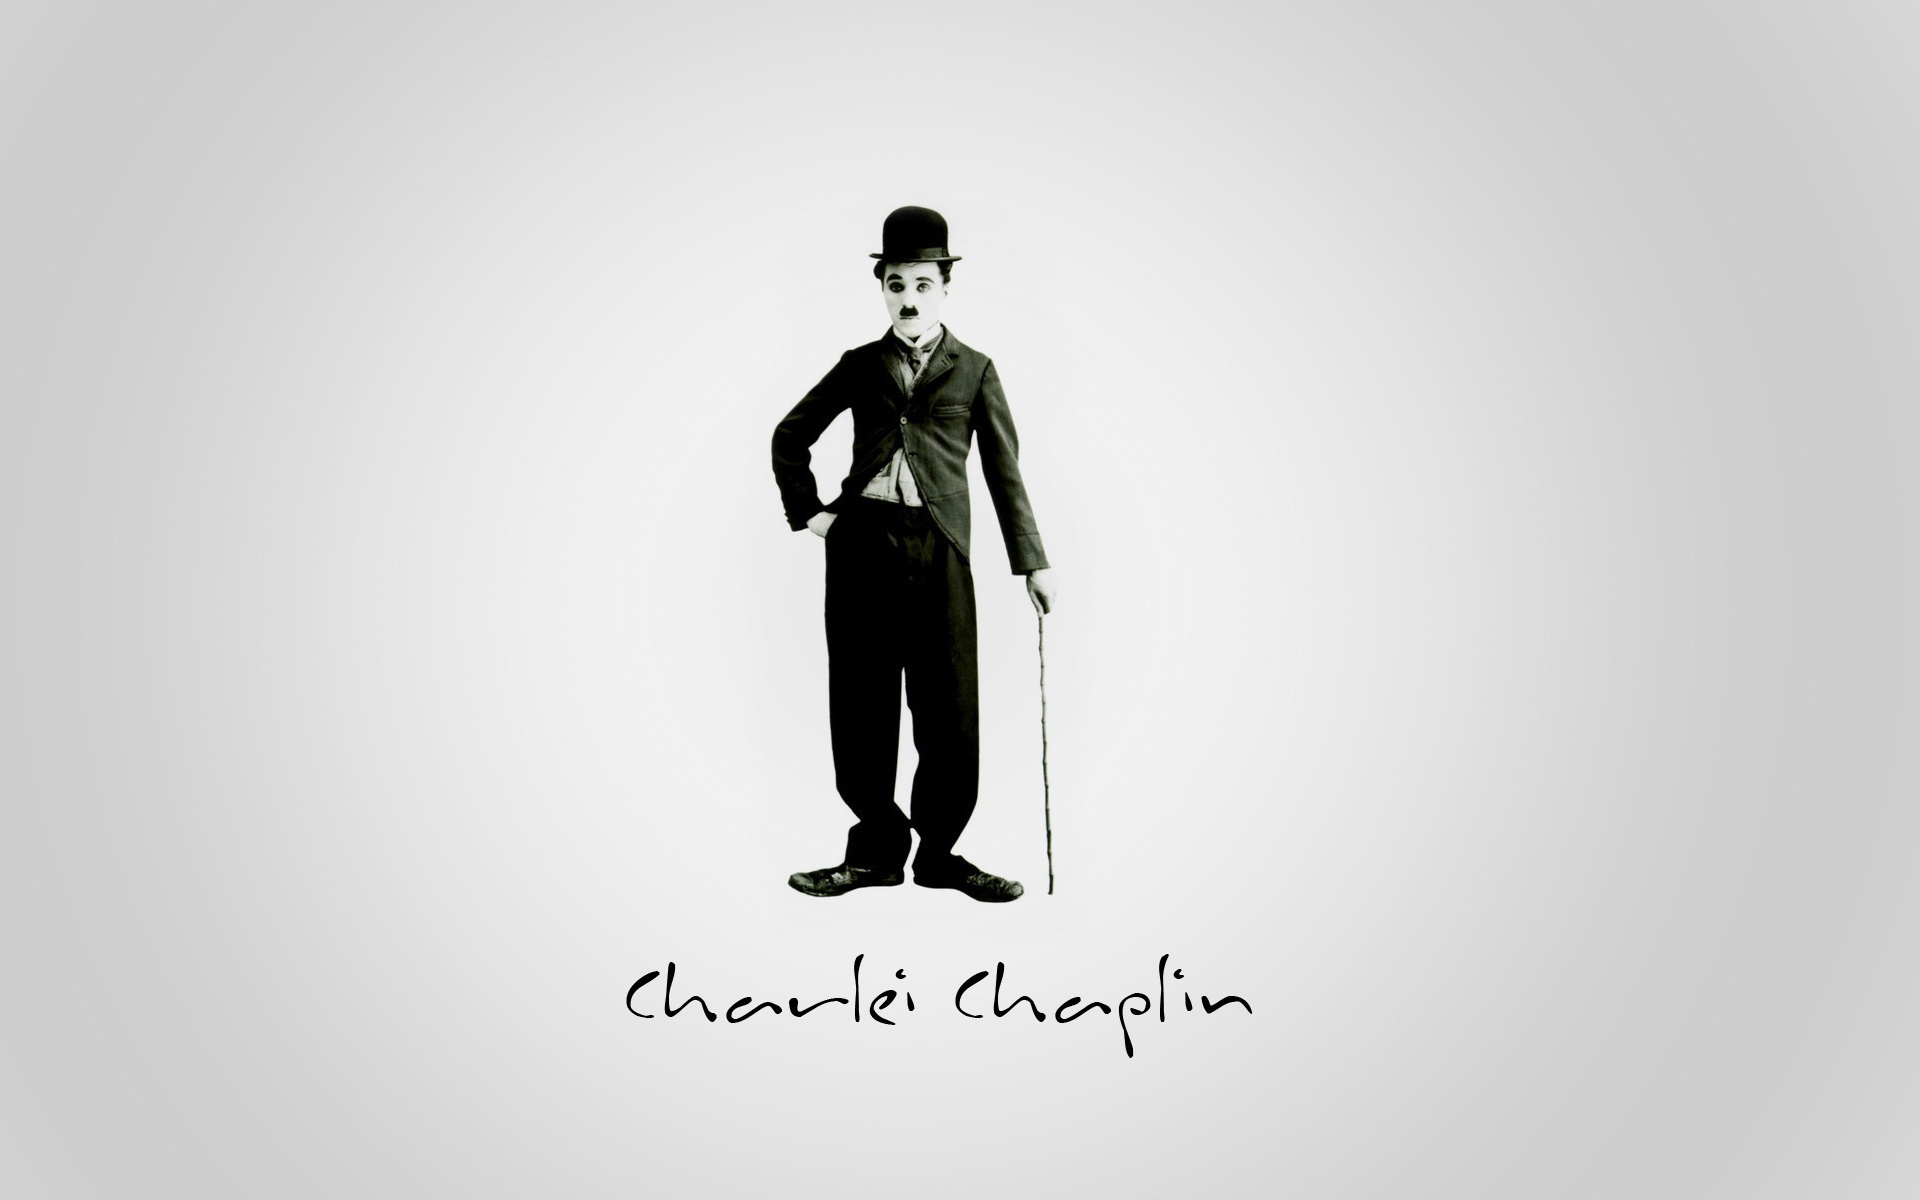 android charlie chaplin, celebrity